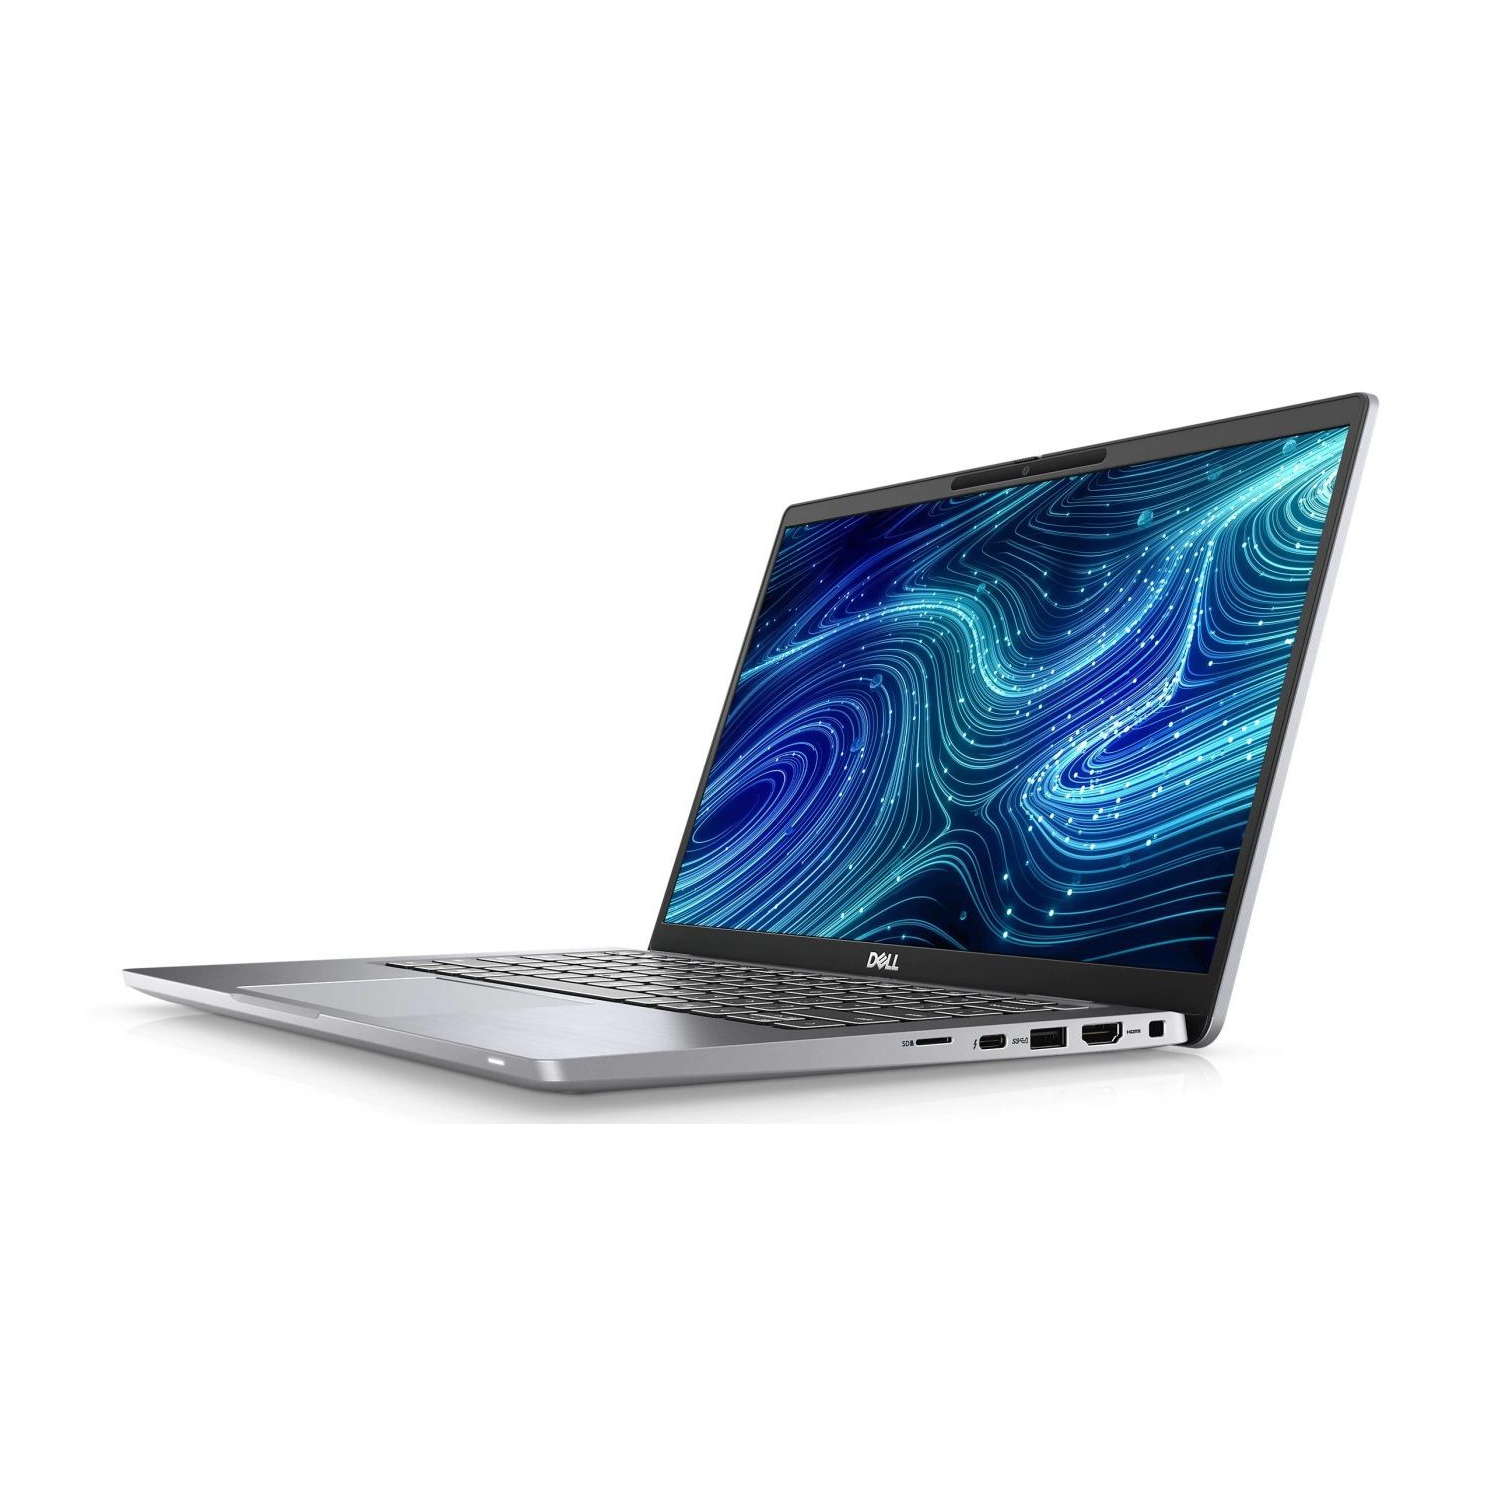 Refurbished (Excellent) - Dell Latitude 7000 7420 Laptop (2021) | 14" FHD Touch | Core i5 - 512GB SSD - 16GB RAM | 4 Cores @ 4.4 GHz - 11th Gen CPU Certified Refurbished